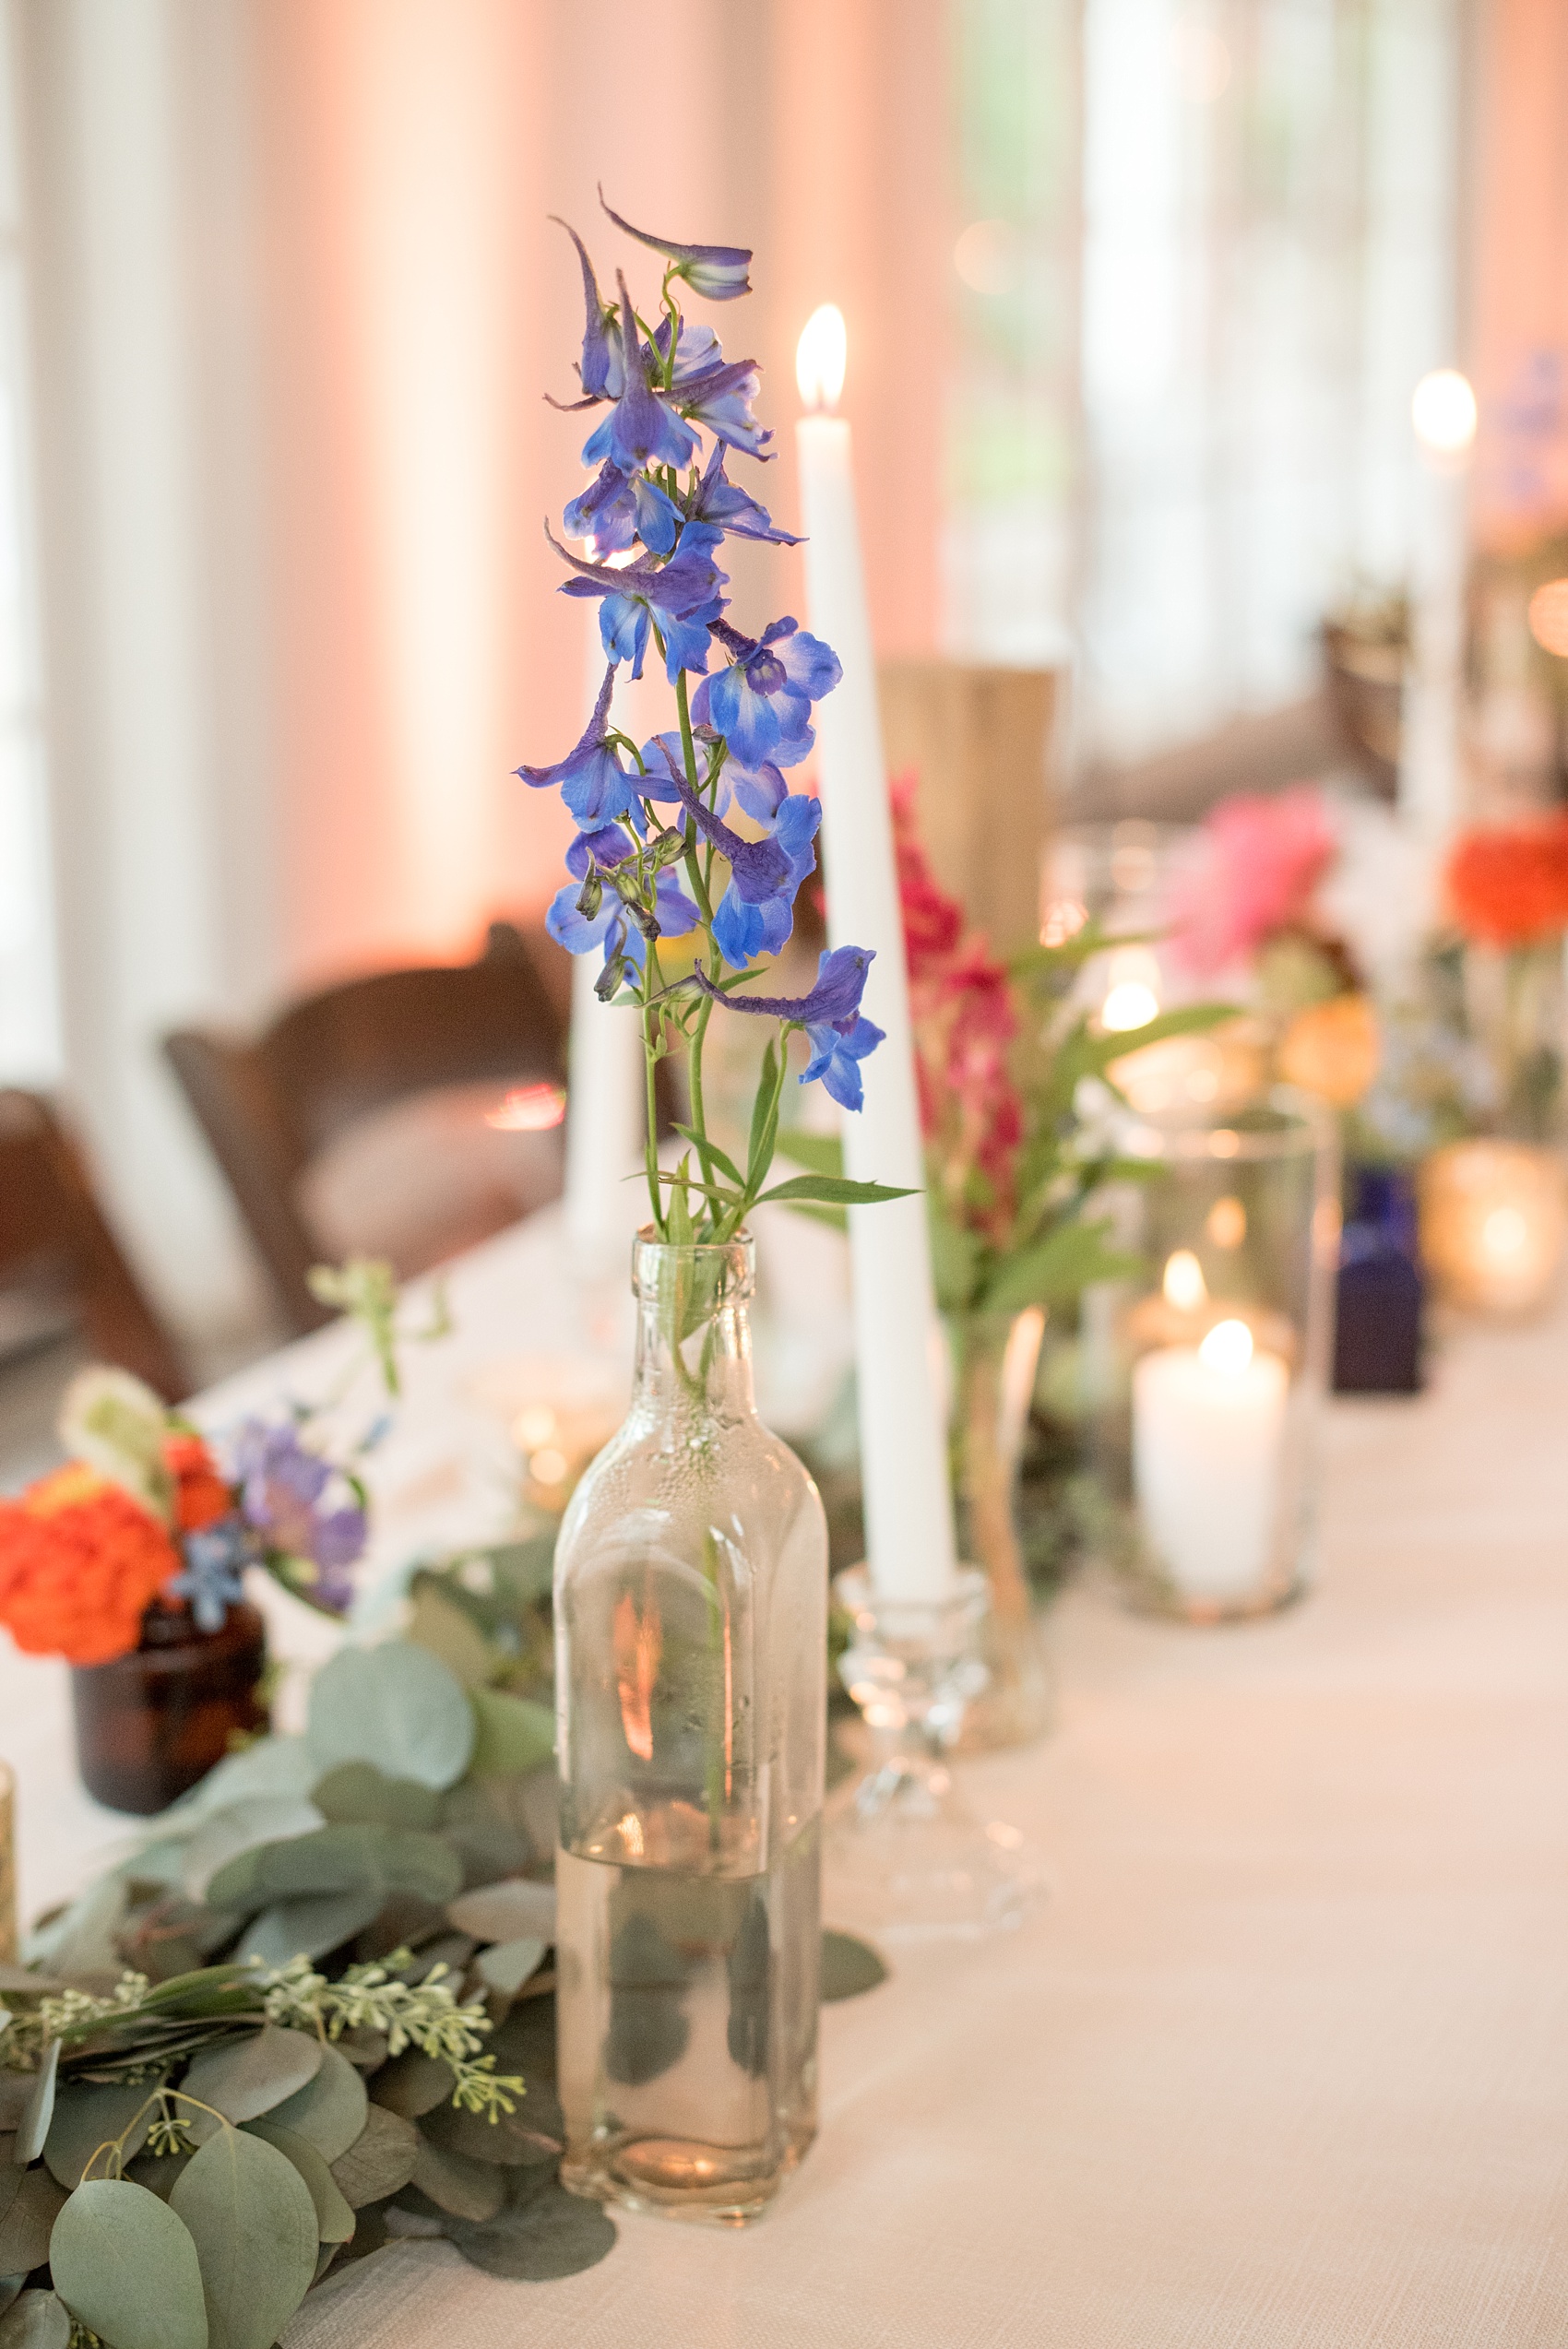 Mikkel Paige Photography wedding photos at The Merrimon-Wynne House in downtown Raleigh. A picture of the carriage house reception with farm tables and rustic details, candlelight, wood table numbers and bud vases with wild flowers.